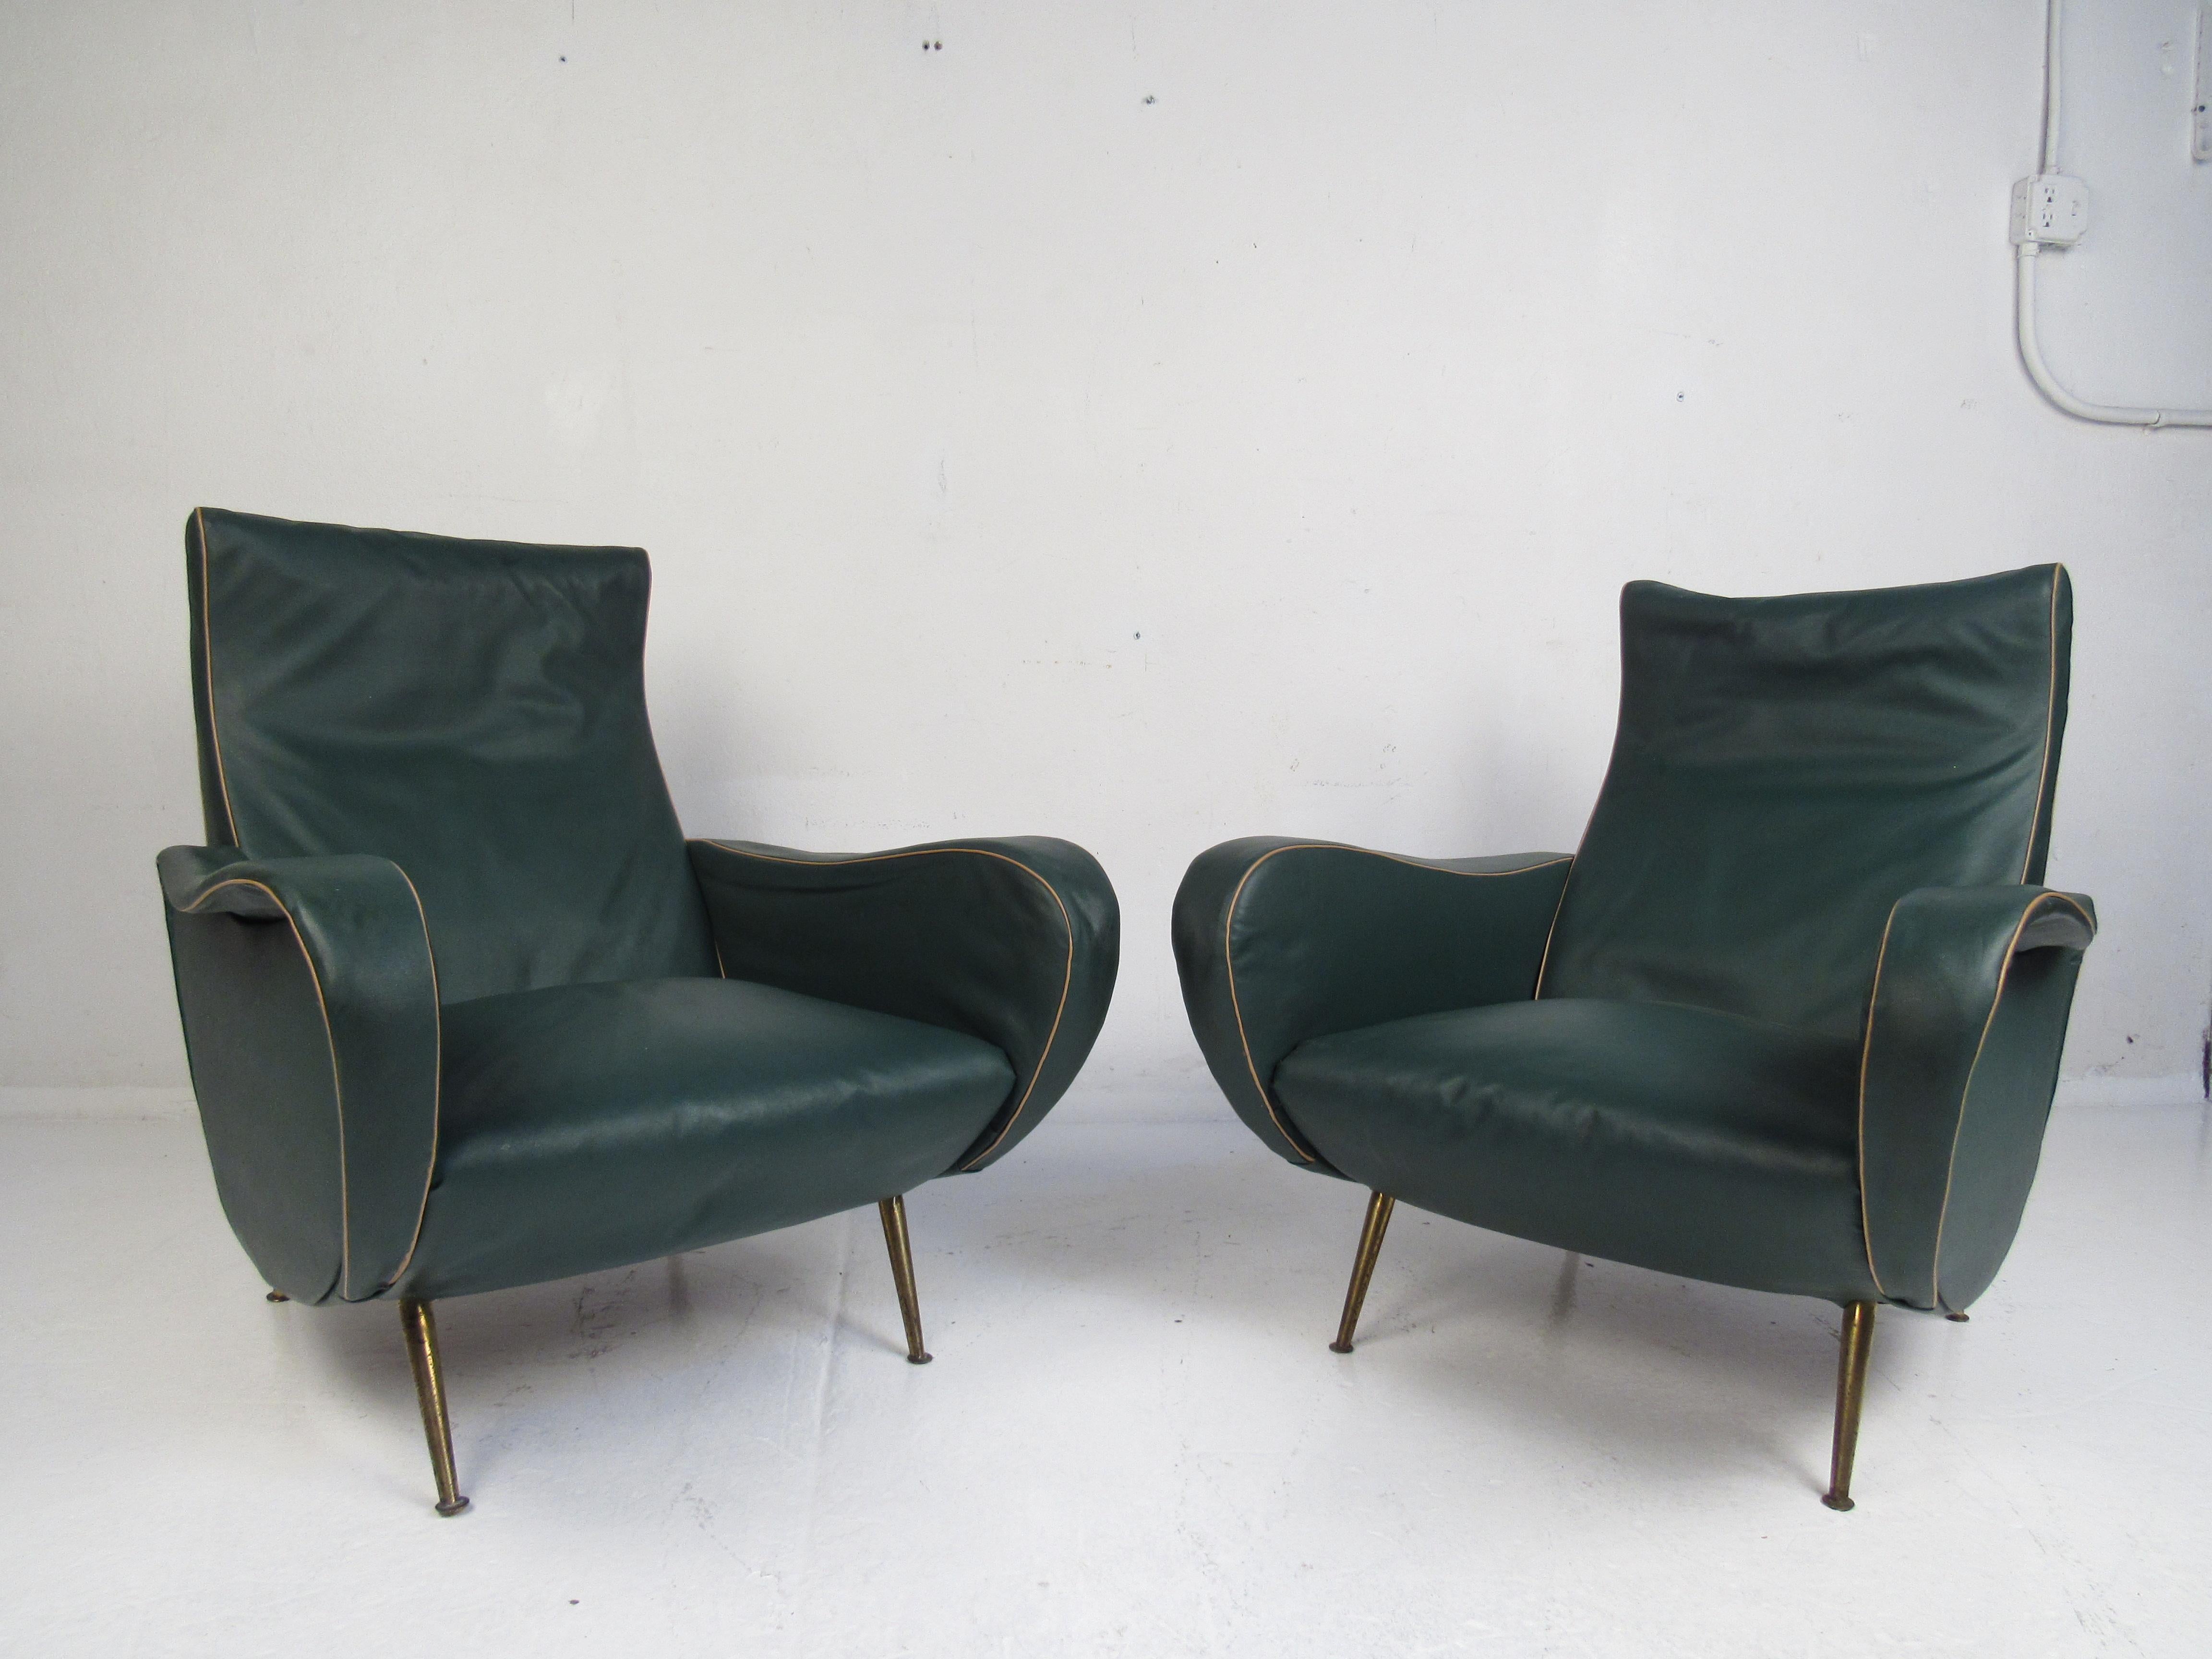 This beautiful pair of vintage modern armchairs boast thick padded seats, unusual armrests, and splayed brass legs. This sleek and comfortable pair of chairs make the perfect addition to any seating arrangement. In the style of Marco Zanuso. Please